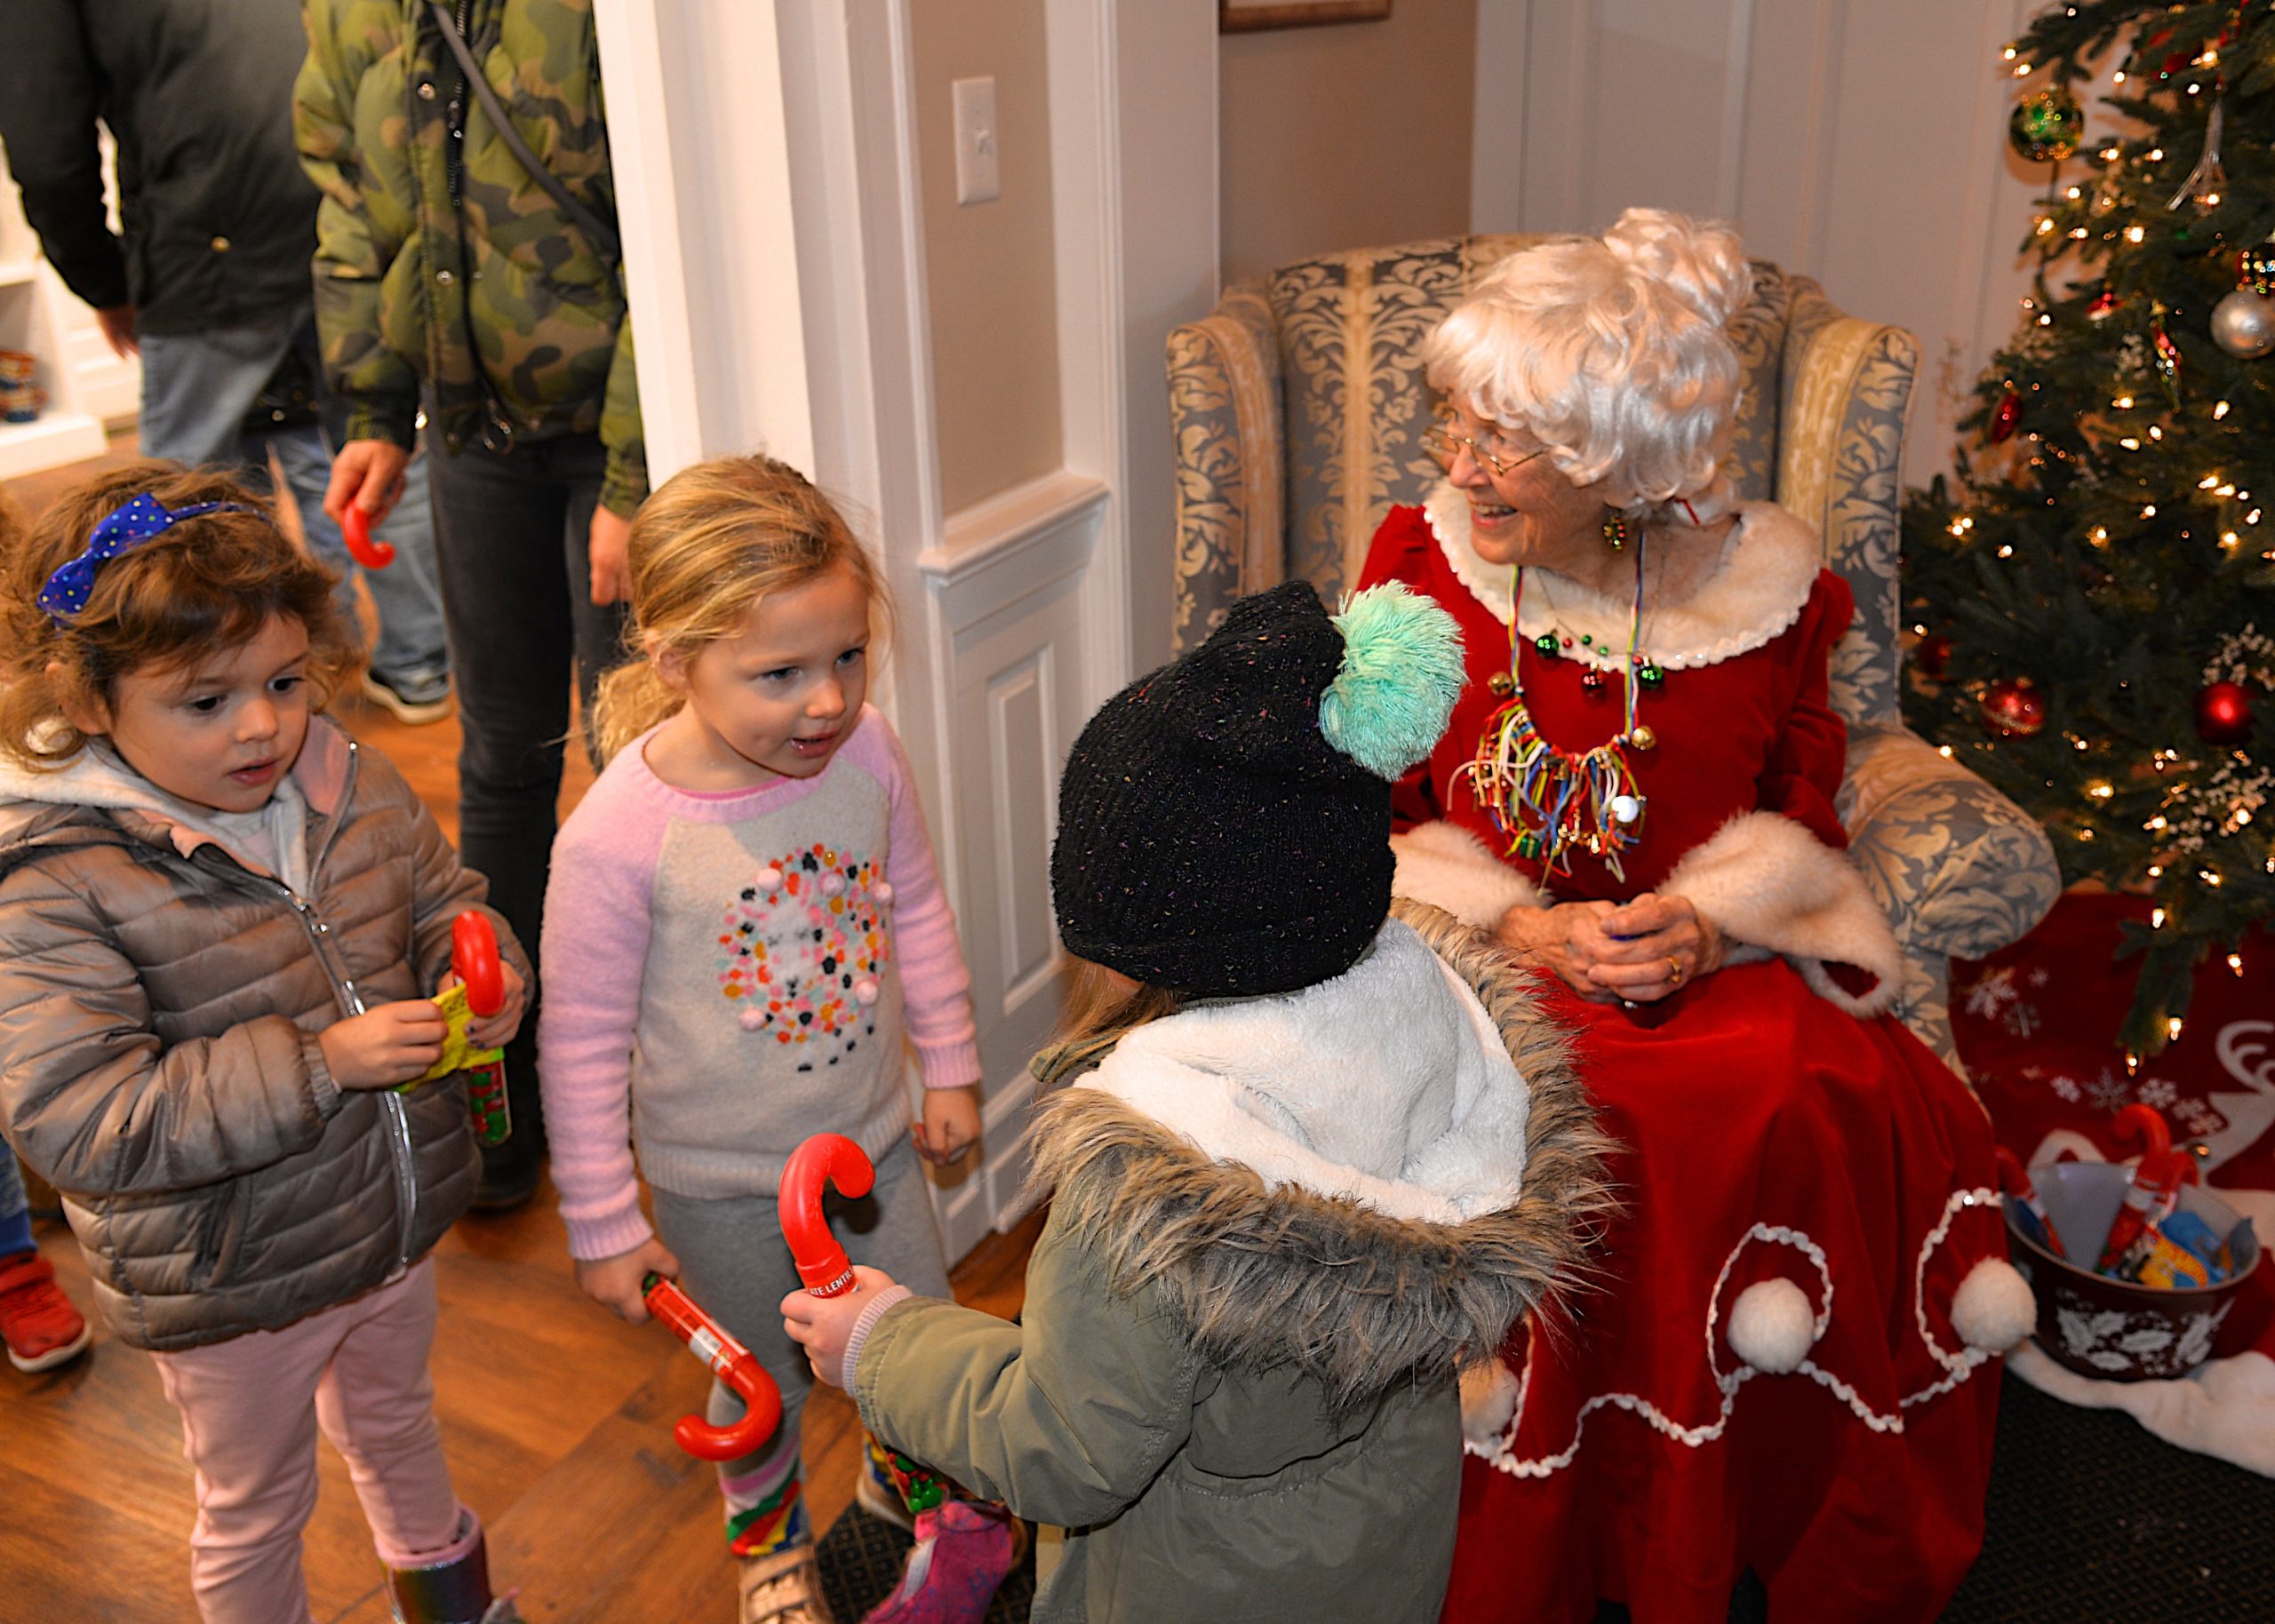 Mrs. Claus was at the East Hampton Ladies Village Improvement Society to greet young visitors during its open house on Saturday. KYRIL BROMLEY